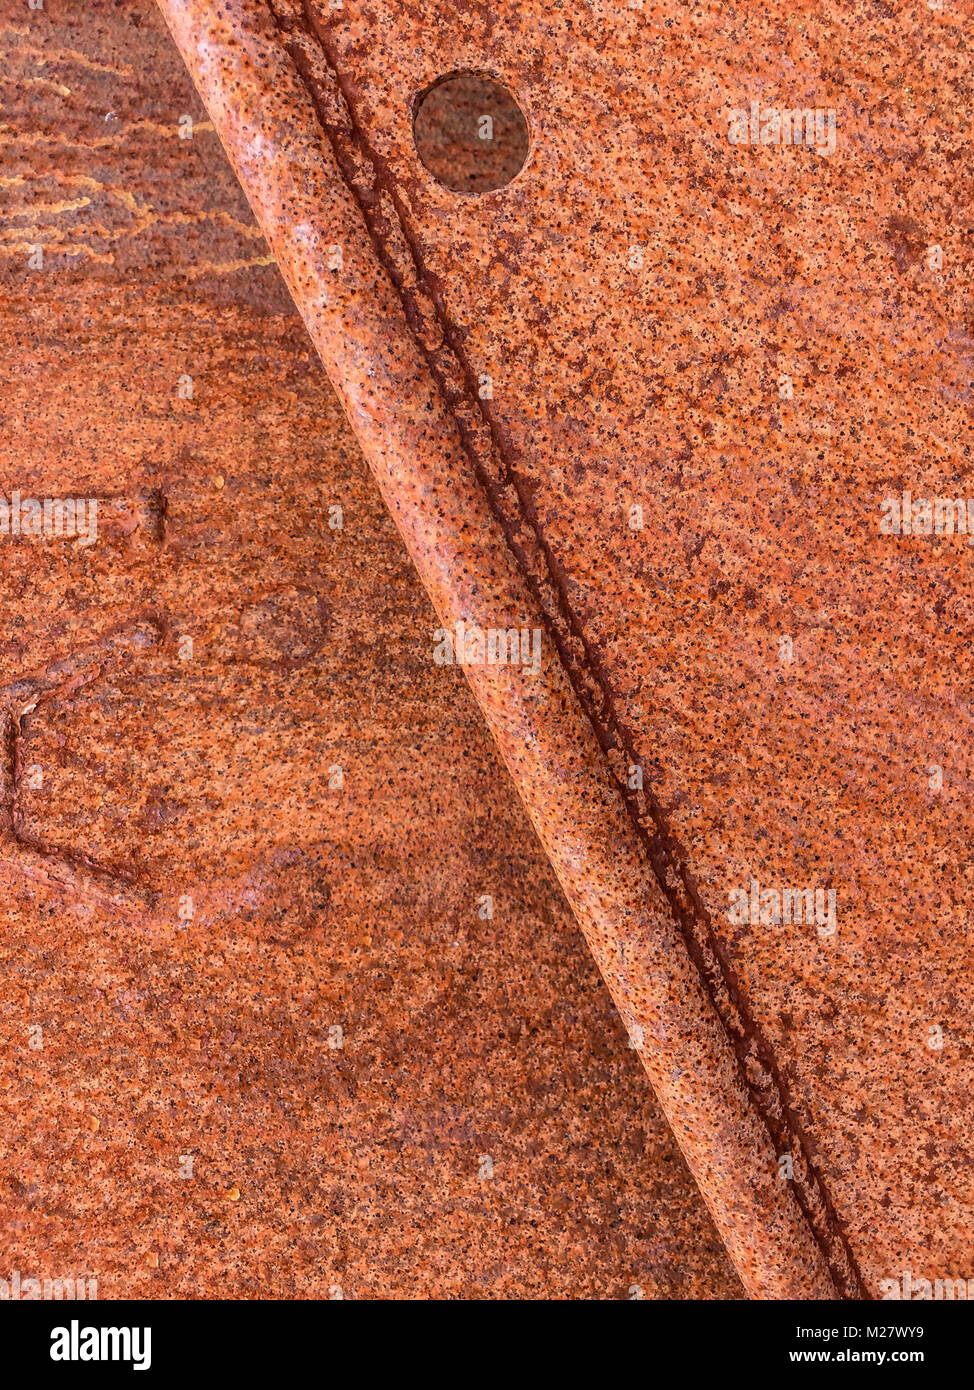 Full frame shot of rusty metal texture. Stock Photo